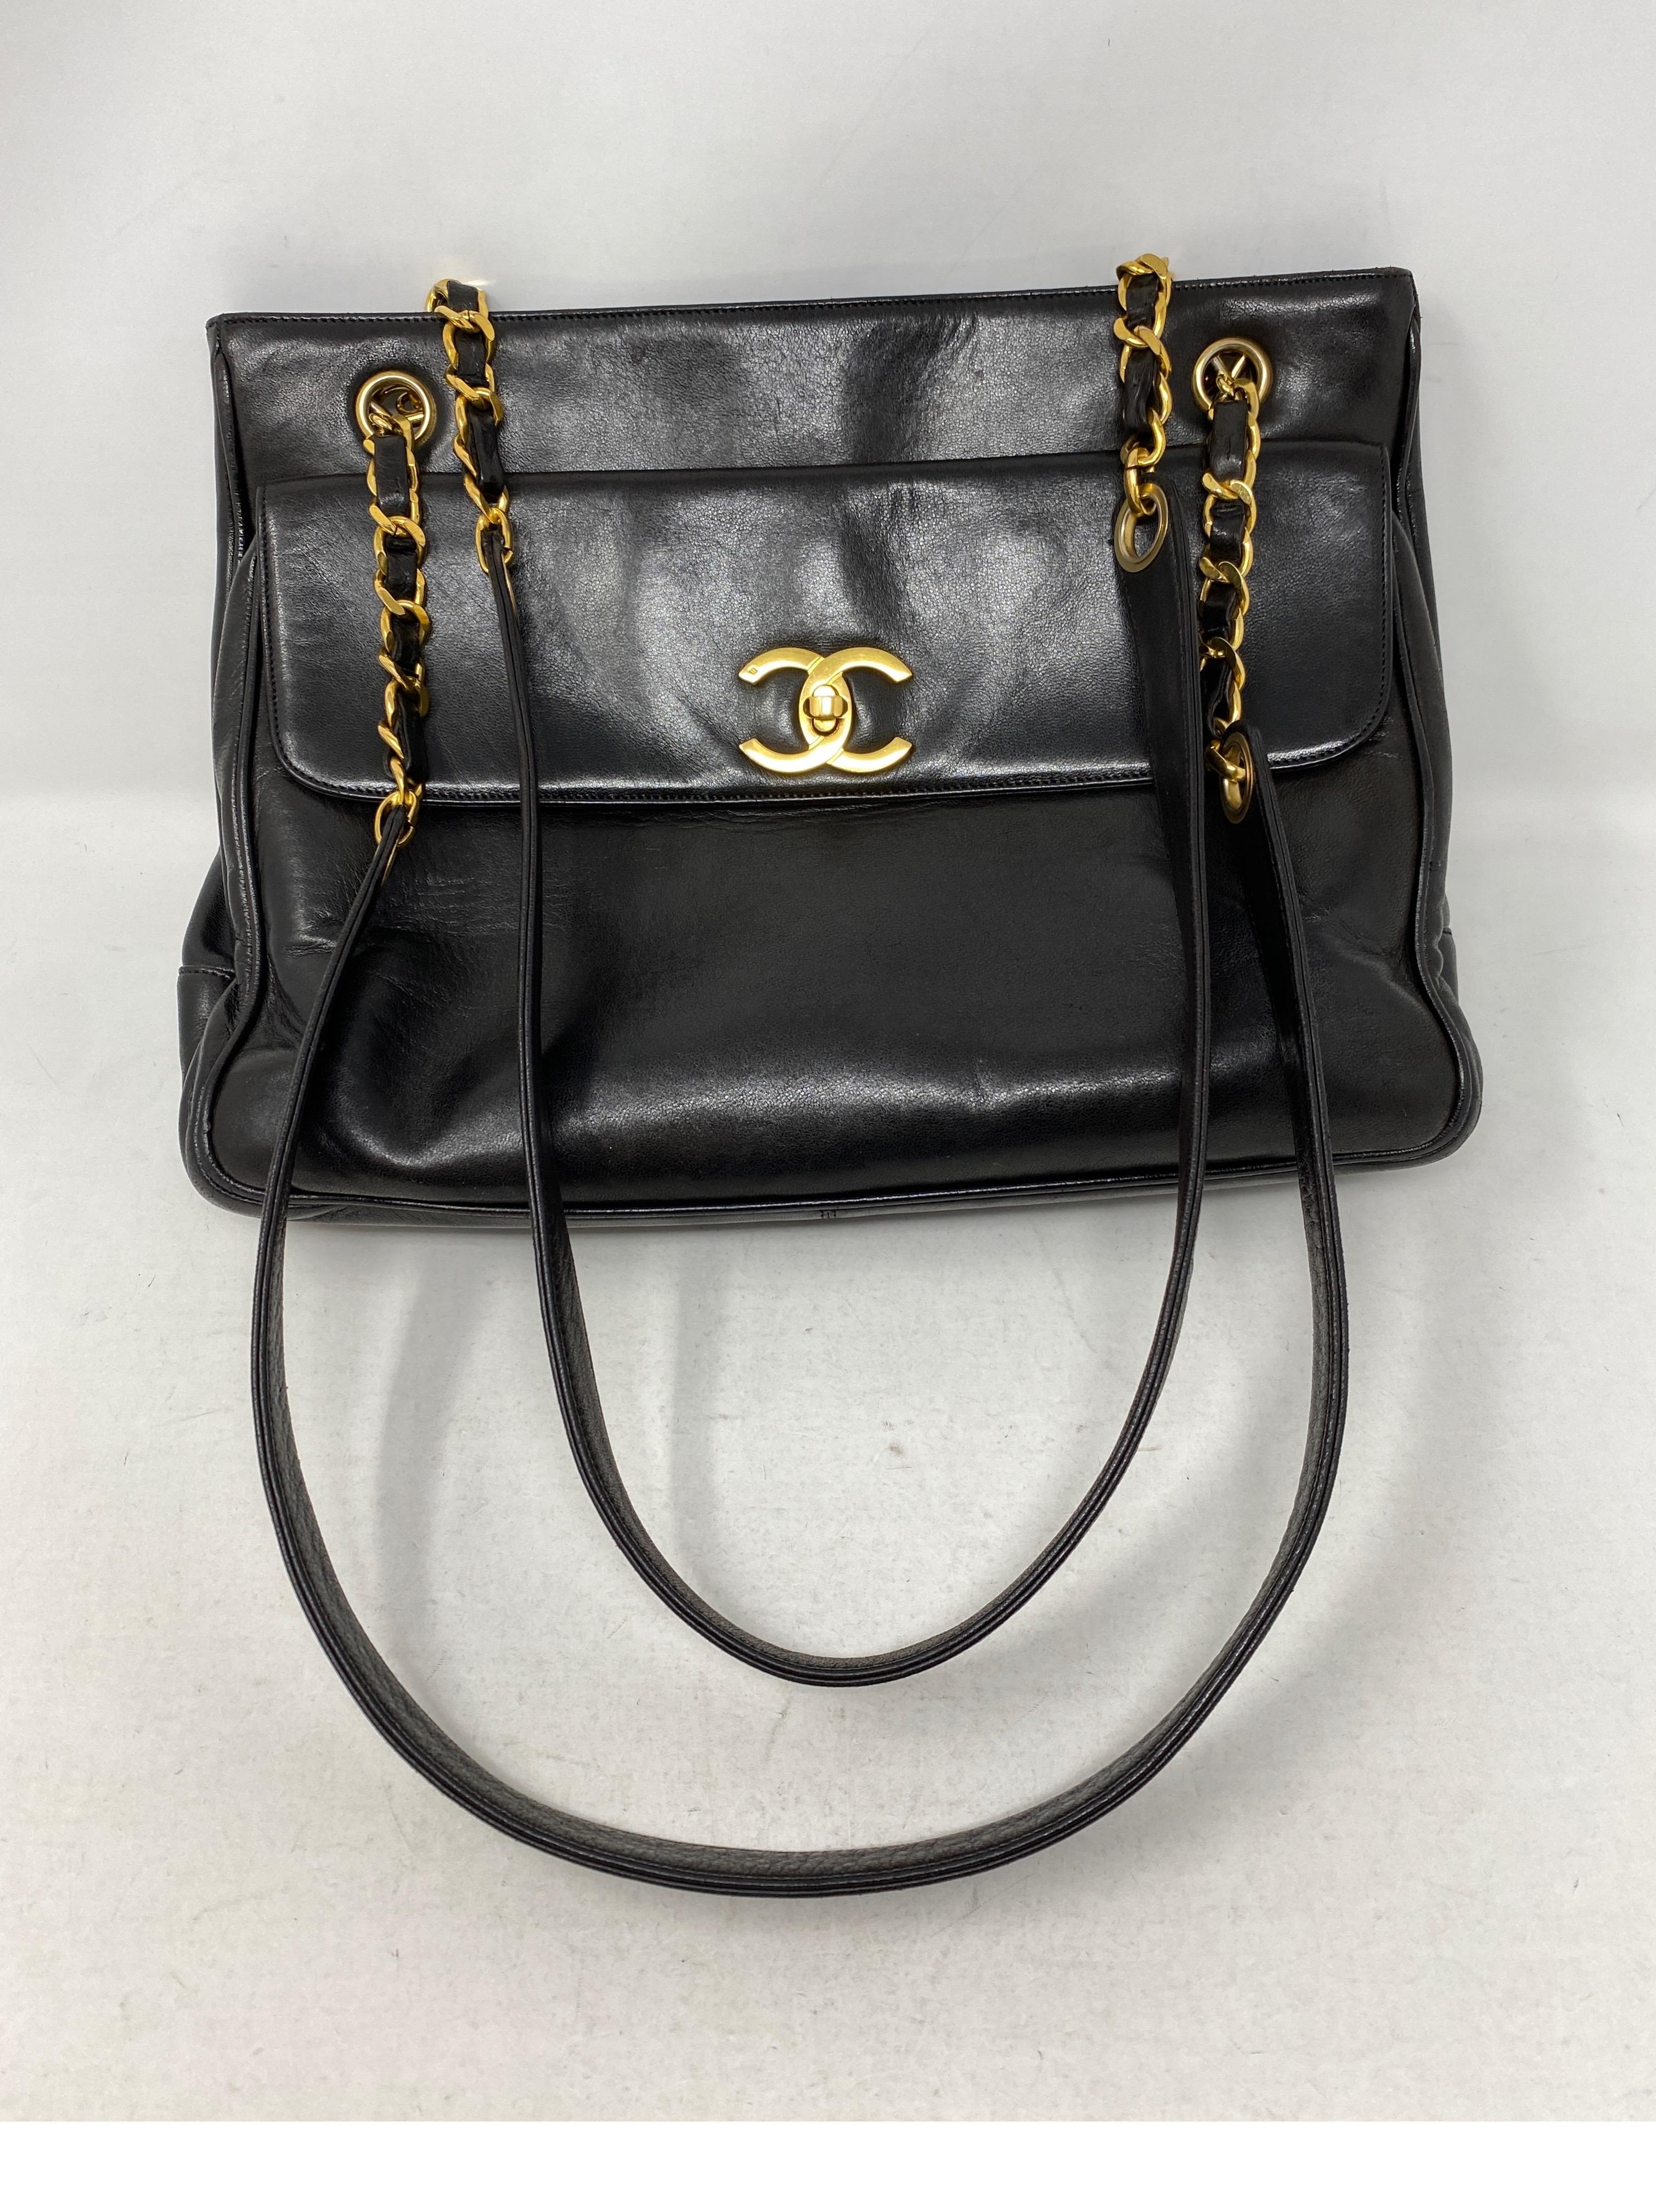 1990s Chanel Black Leather Tote Bag 9